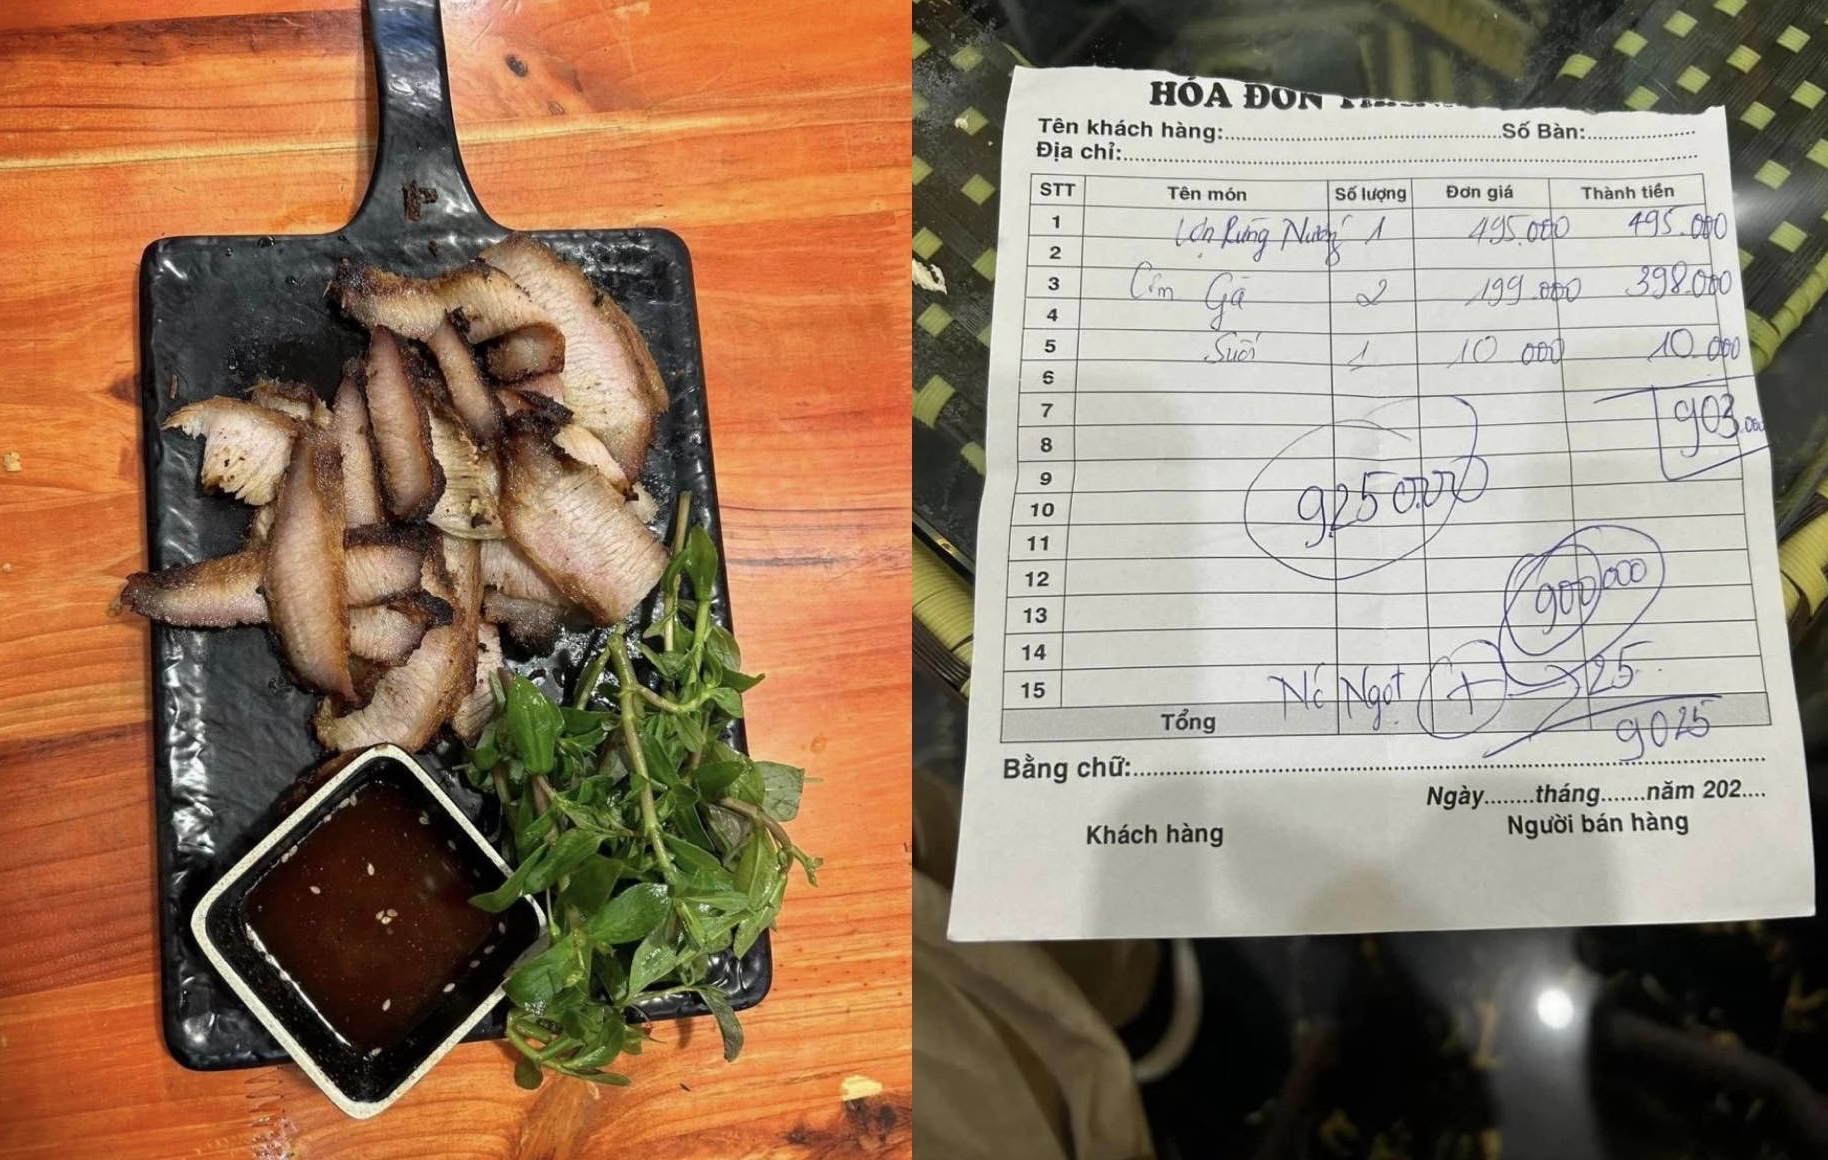 Restaurateur fined $296 for overcharging tourists in Vietnam’s famed Sa Pa Town